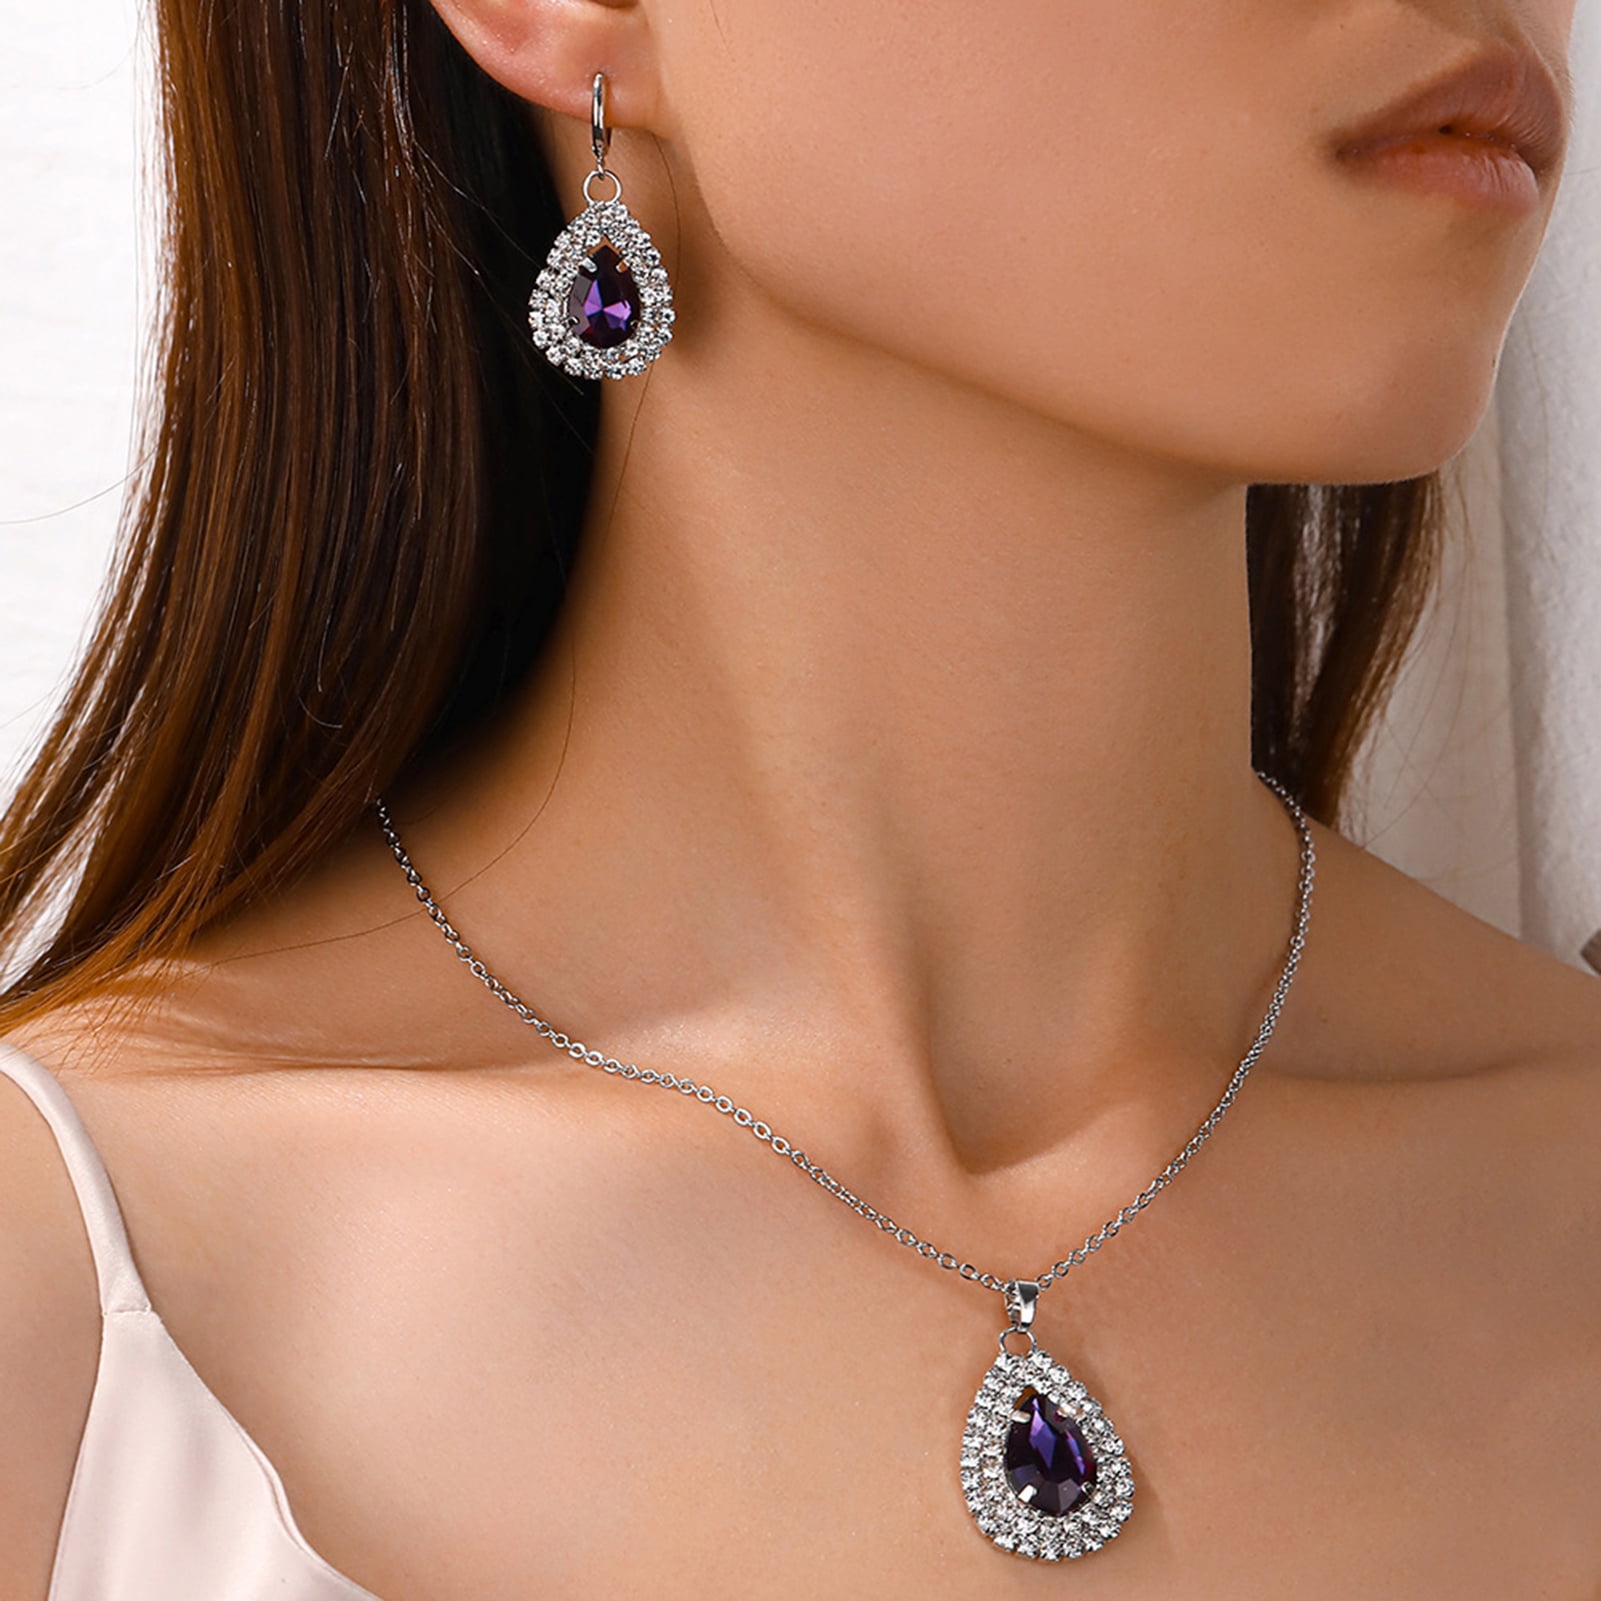 925 Silver Bridal Silver Plated Jewellery Set With Purple Cubic Zirconia  Includes Bracelet, Ring, Earrings, Pendant, And Necklace For Womens Wedding  Costume From Hookah14, $21.12 | DHgate.Com